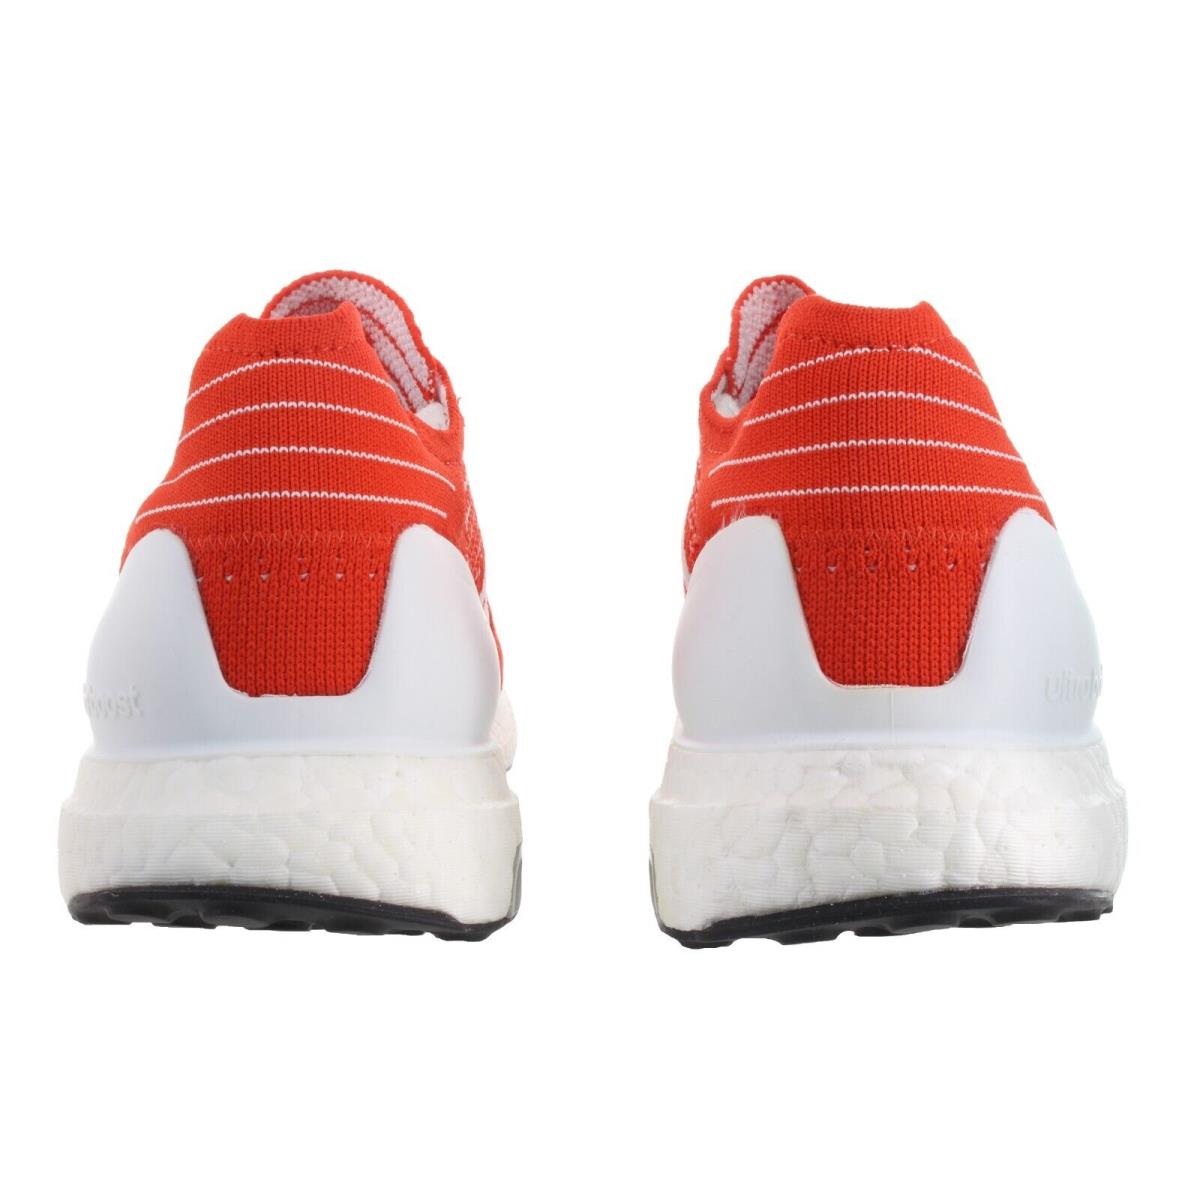 Adidas shoes Ultraboost DNA Prime - Active Red, Cloud White, Core Black 2